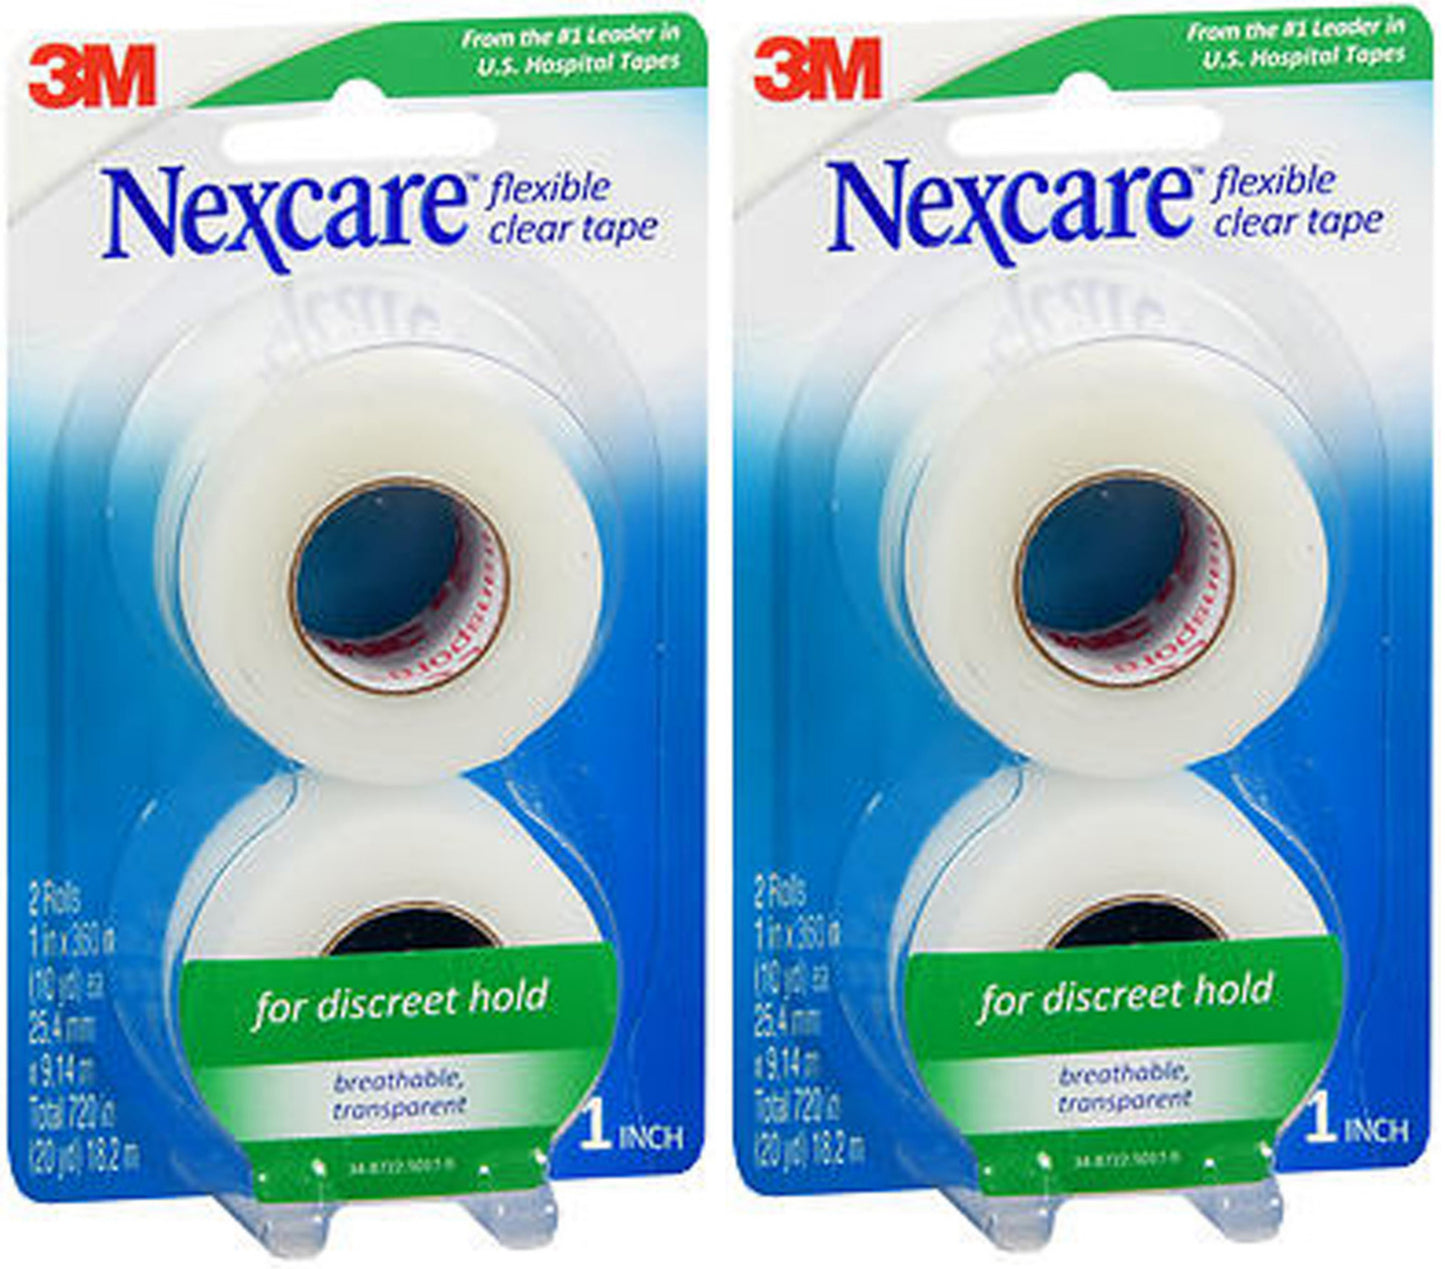 Nexcare Flexible Clear Tape, Hypoallergenic, 1 Inch X 10 Yard Roll, 4 Rolls - Pack of 2